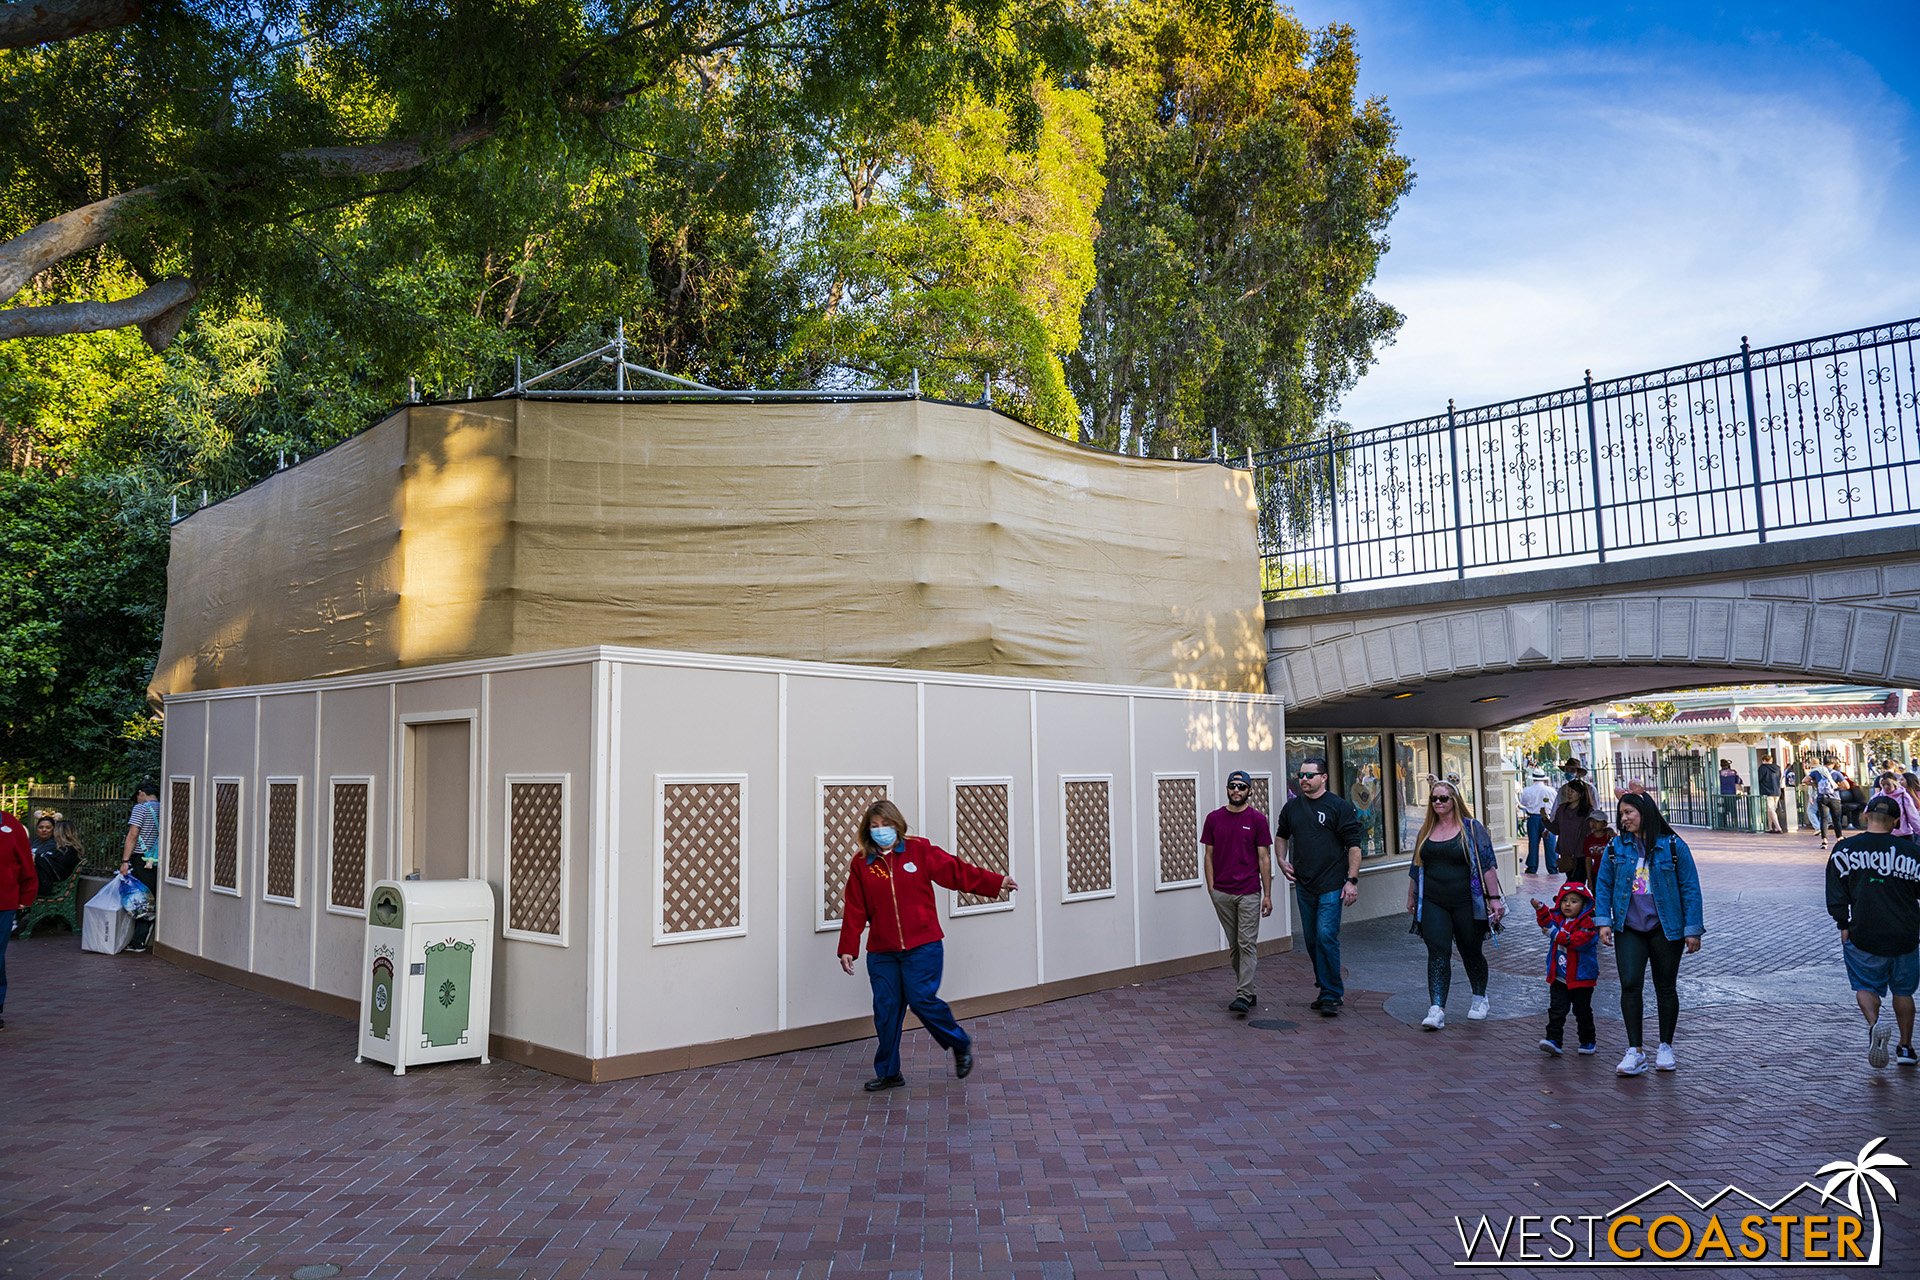  The souvenir stand next to the Disneyland Railroad is under renovations. 